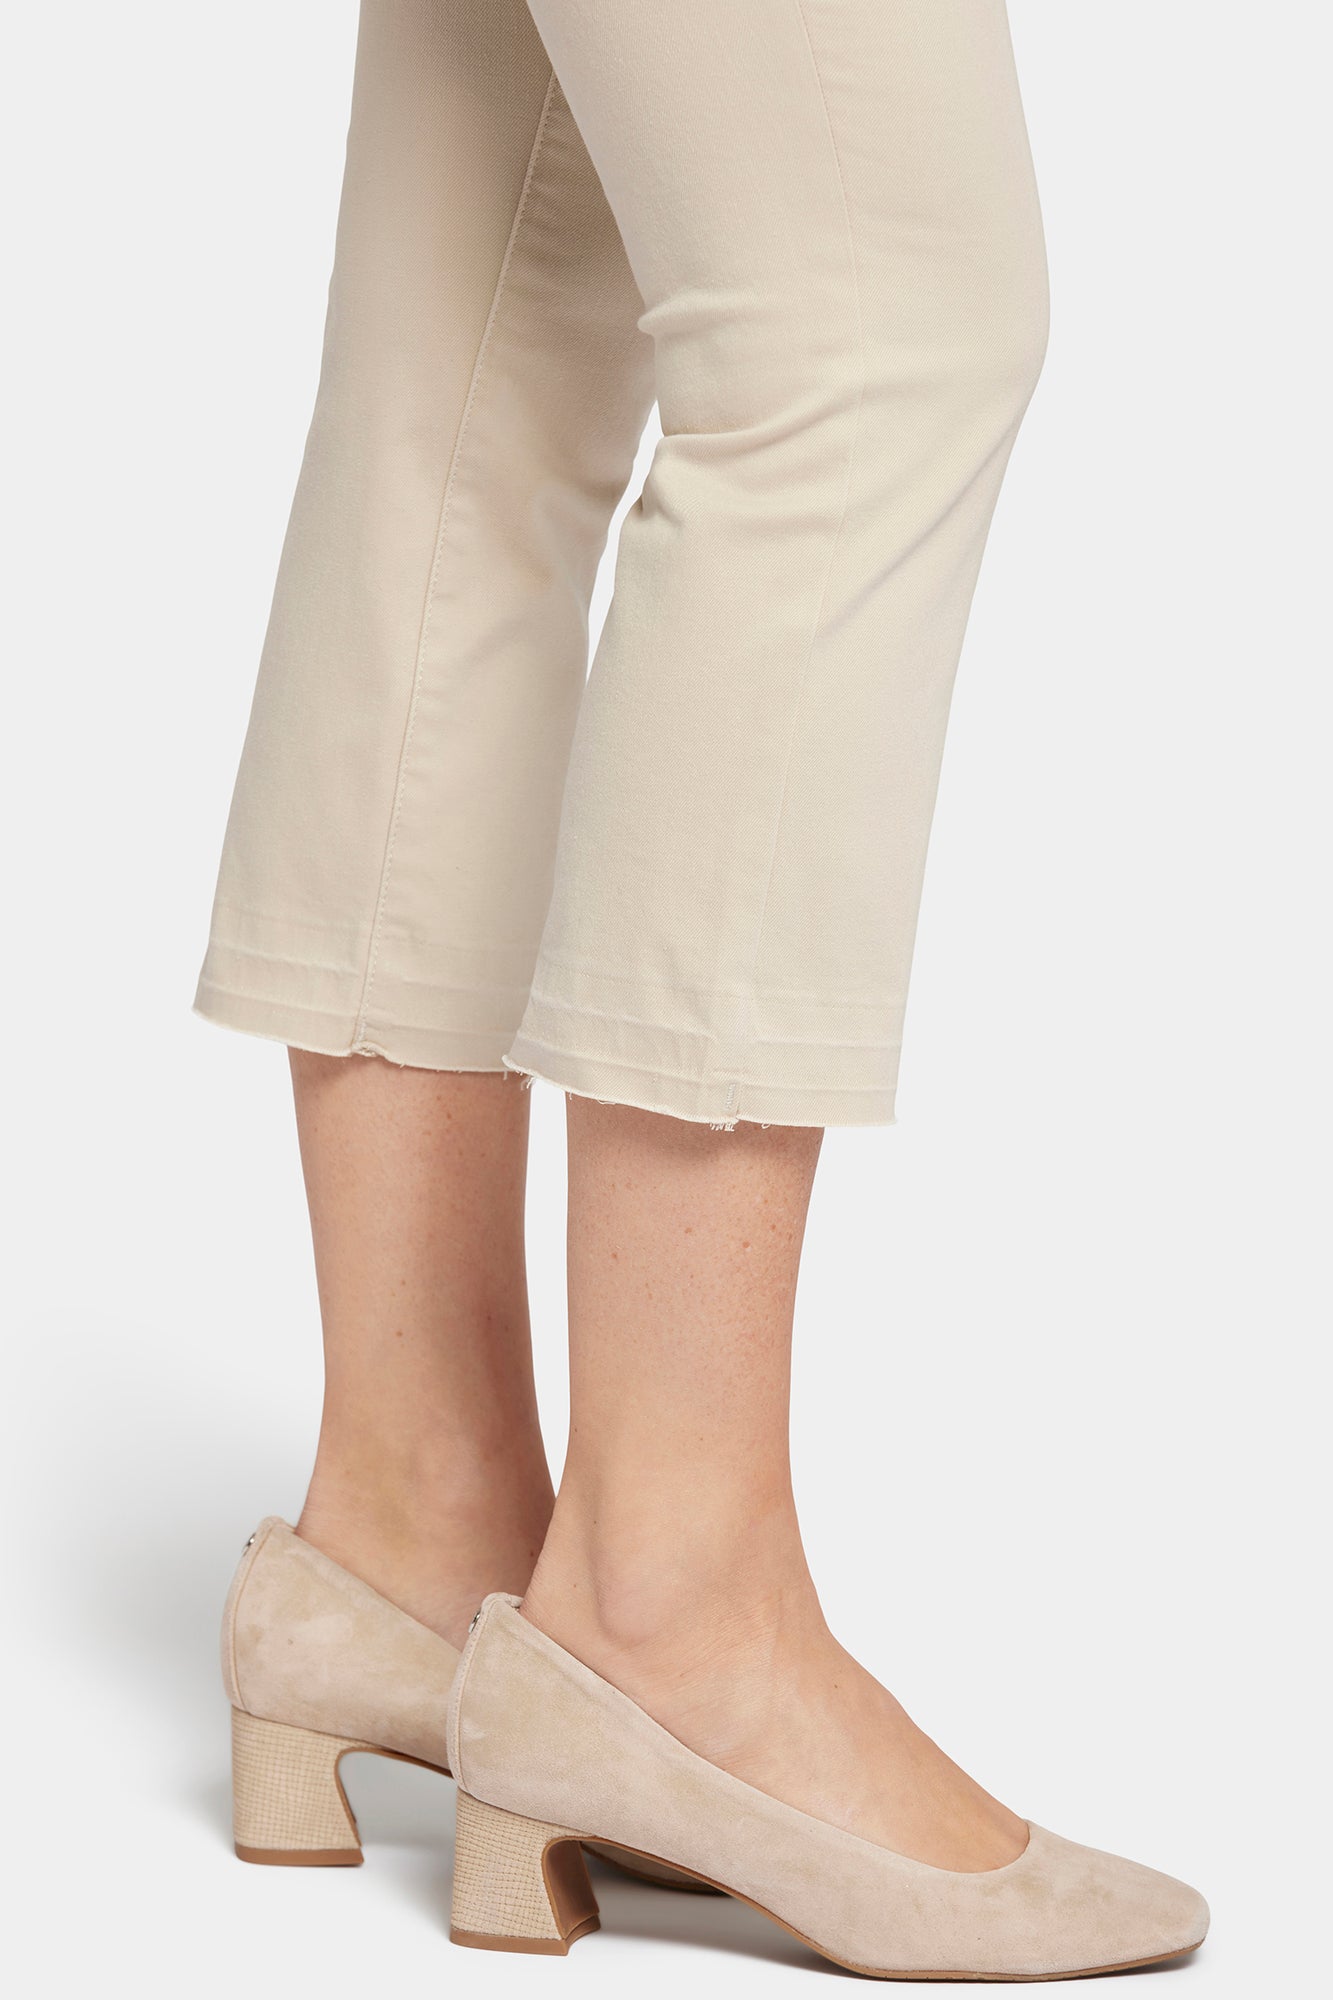 NYDJ Chloe Capri Jeans With High Rise And Released Hems - Feather